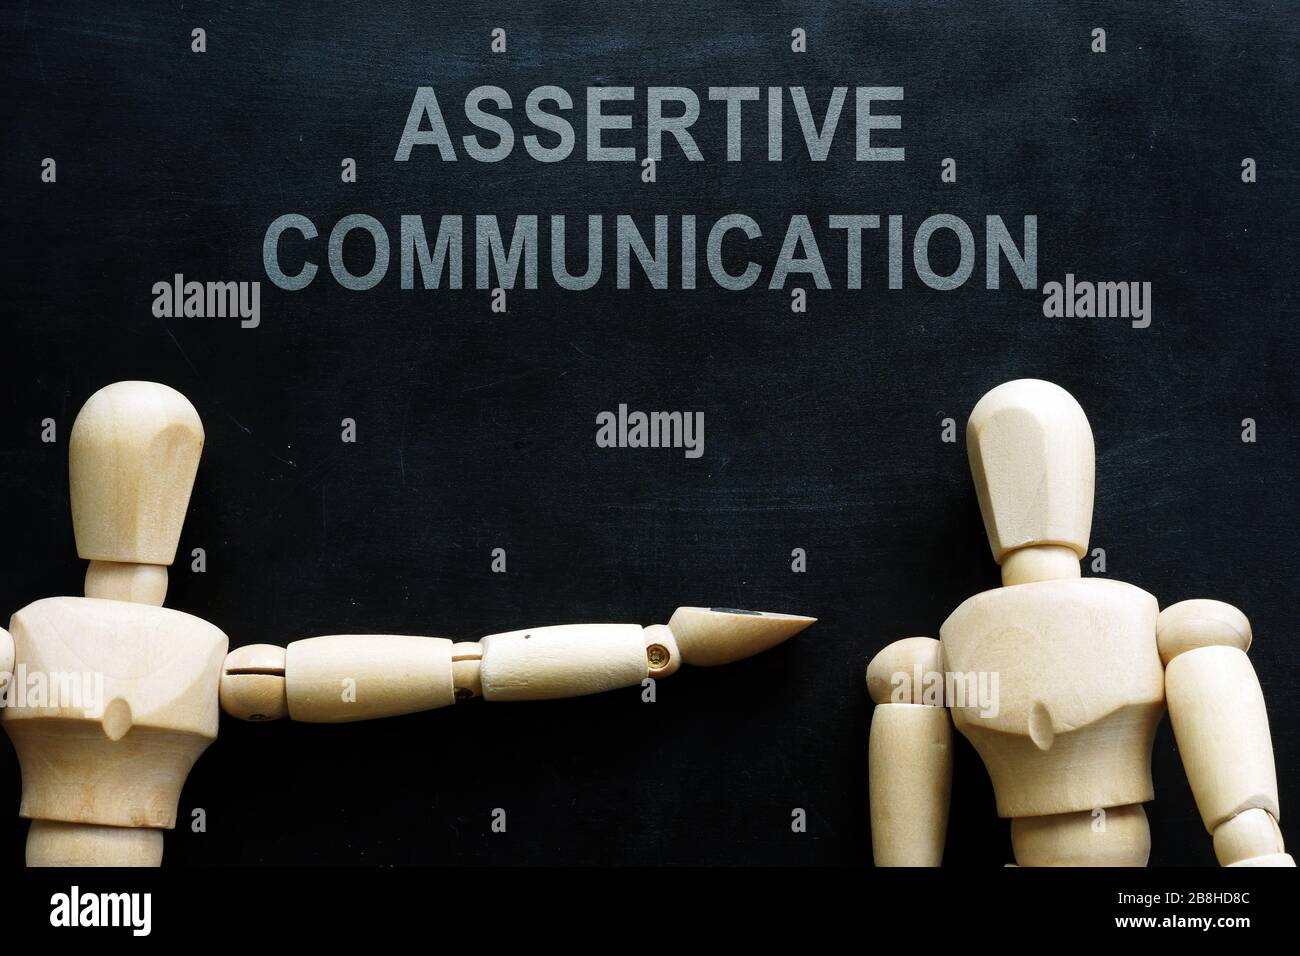 Assertive communication phrase and two wooden figures. Stock Photo